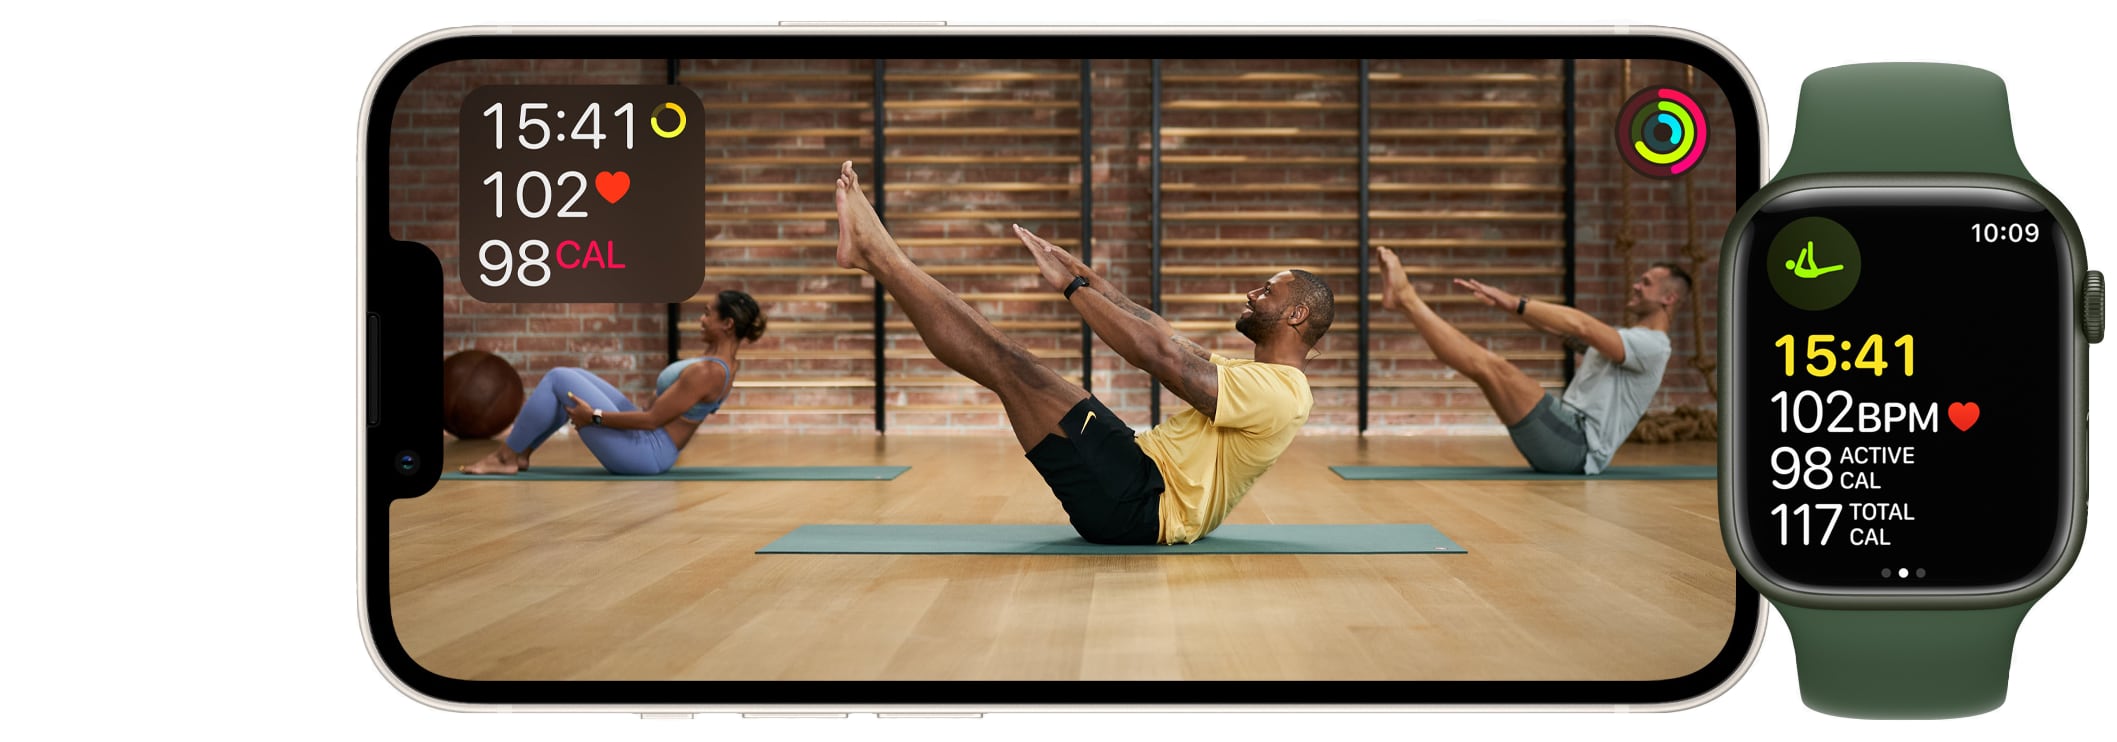 Marketing image showing the pilates workout for Apple Fitness+ on iPhone and Apple Watch